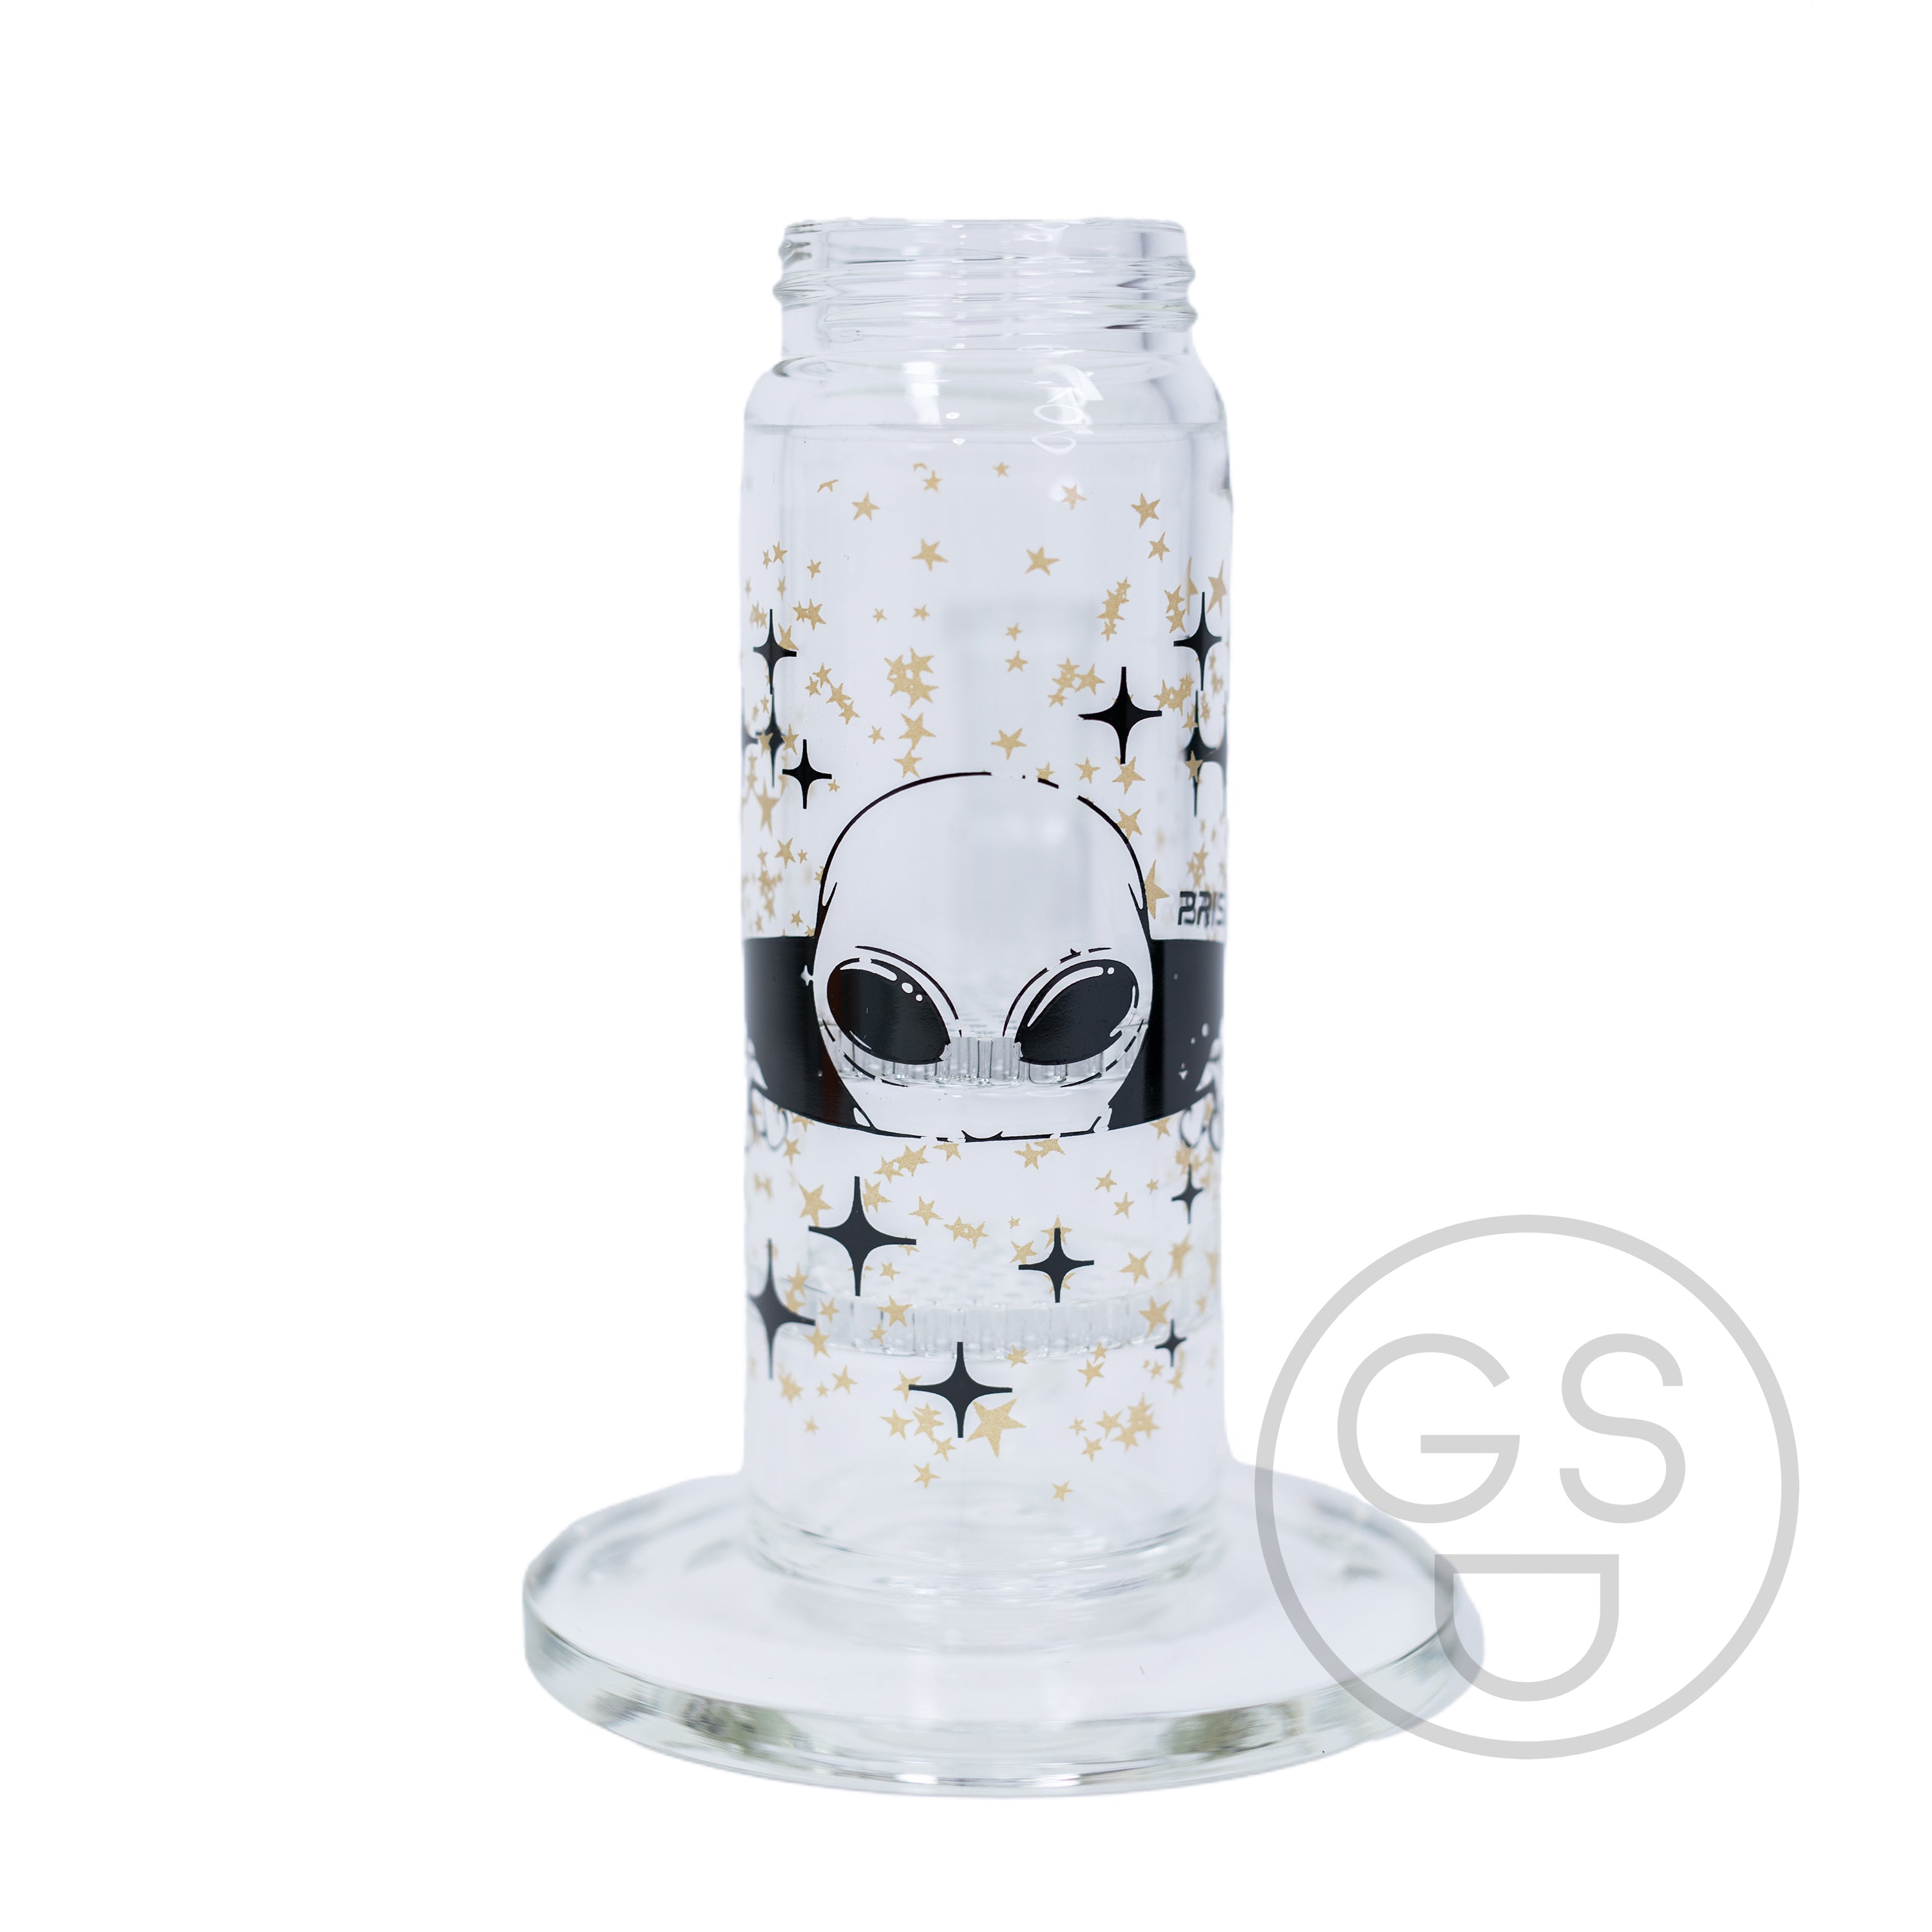 Prism Modular Waterpipe Honeycomb Base - Spaced Out